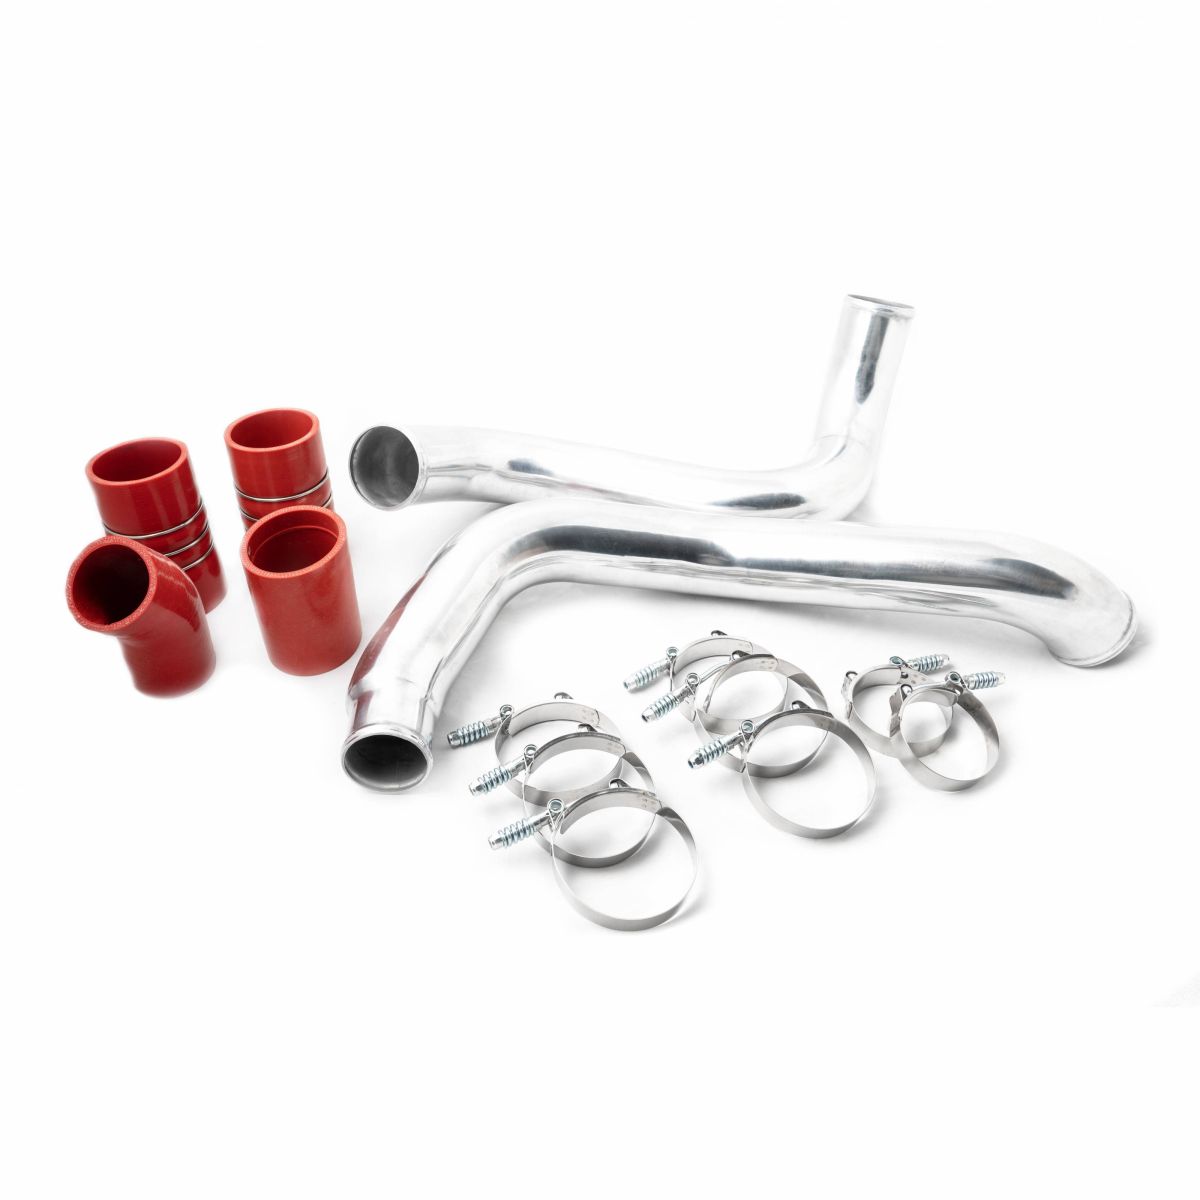 Rudy's Performance Parts - Rudy's Polished Intercooler Pipe & Red Boot Kit For 03-07 6.0L Powerstroke